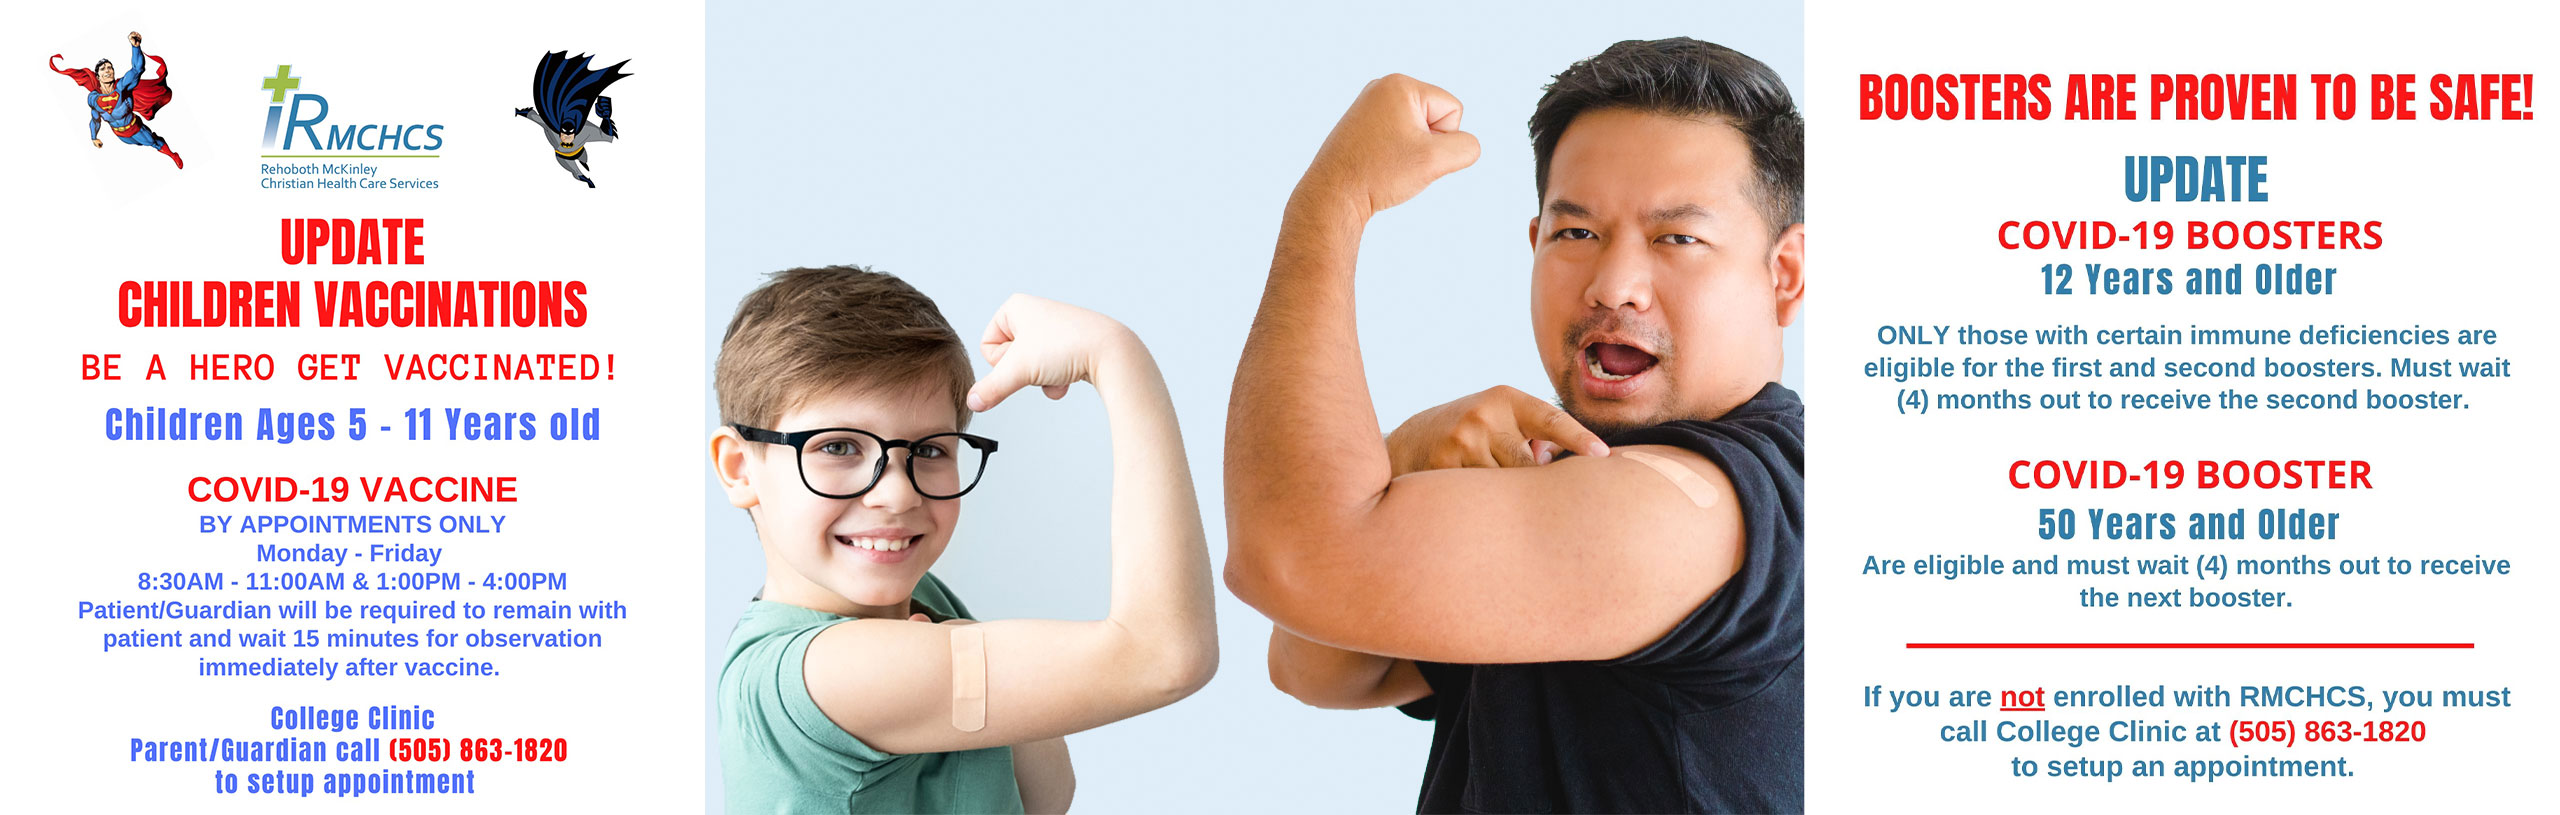 Banner picture of a man and little boy showing their muscles on their arms and the man is pointing to his bandaid from the Covid Vaccine. Banner says:

CHILDREN VACCINATIONS
BE A HERO GET VACCINATED!
Children Ages 5-11 Years old
COVID-19 VACCINE
BY APPOINTMENTS ONLY
Monday-Friday
8:30AM-11:00 AM & 1:00PM - 4:00PM
Patient/Guardian will require to remain with patient and wait 15 minutes for observation immediately after vaccine.

COVID-19 TEST
For Children
Call (505) 236-1074
Someone will come to your vehicle.
Monday - Friday
8:00 AM - 4:00 PM

College Clinic 
Parent/Guardian call (505) 863-1820
to set up appointment 

ADULT VACCINATIONS
12 Years and Older 
COVID-19 VACCINE & BOOSTER
Monday- Friday
8:00AM - 4:00PM
Patient/Guardian will be required to remain with patient and wait 15 minutes for observation immediately after vaccine,

COVID-19 TEST
12 Years and Older
Call (505) 236-1074
Someone will come to your vehicle.
Monday - Friday
8:00AM - 4:00 PM
WALK-INS ARE WELCOME
College Clinic
call (505)863-1820
to setup appointment.